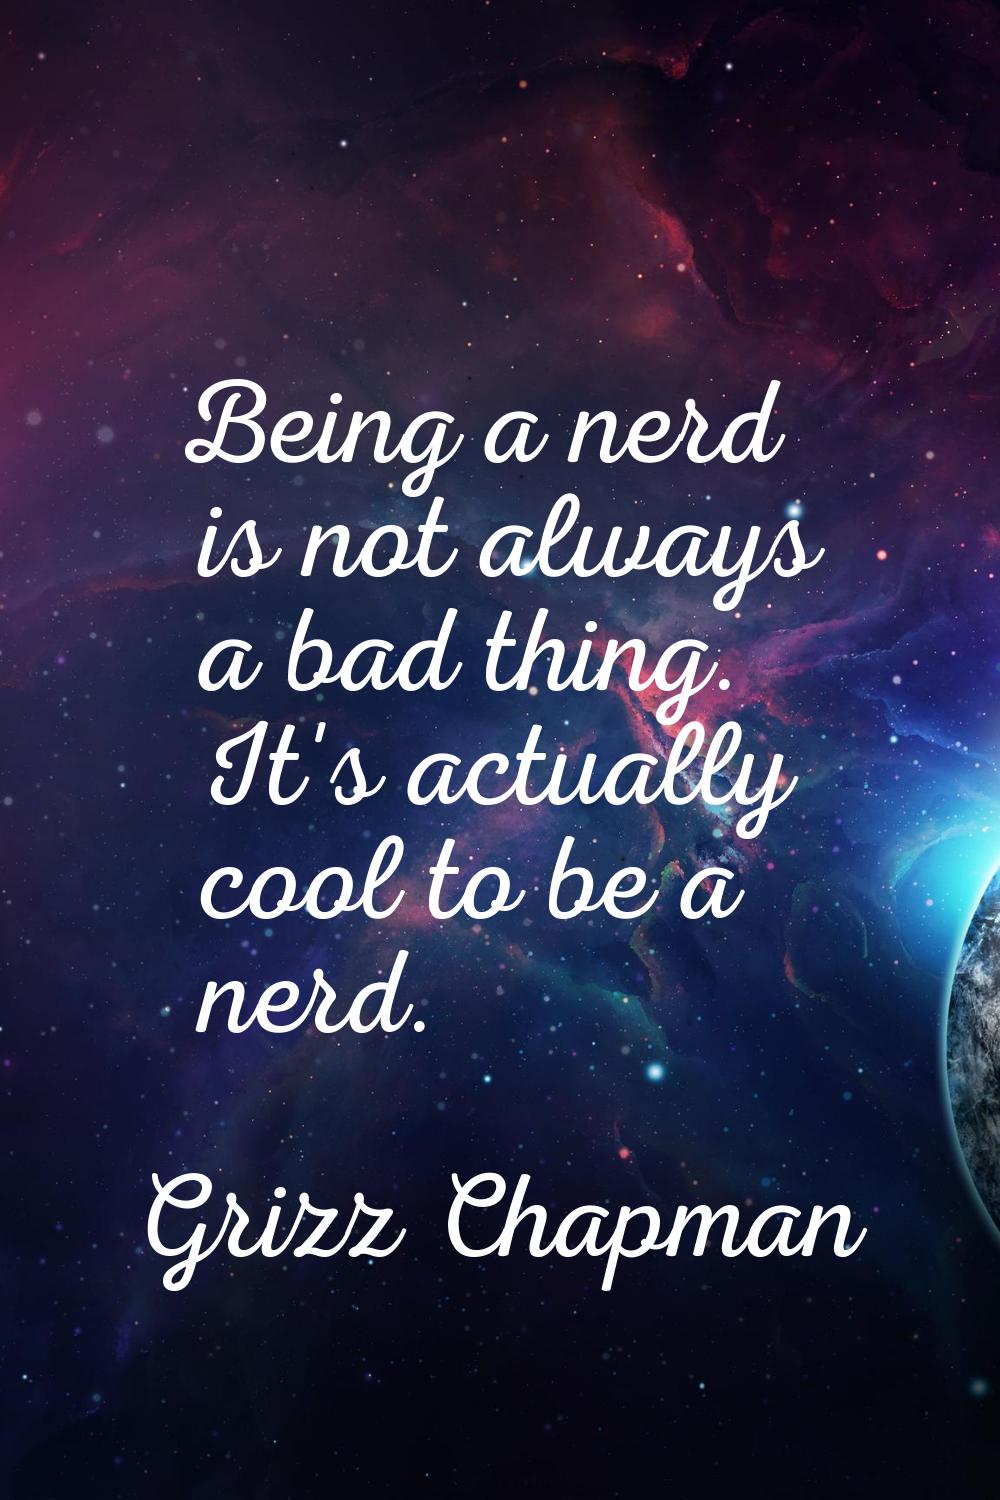 Being a nerd is not always a bad thing. It's actually cool to be a nerd.